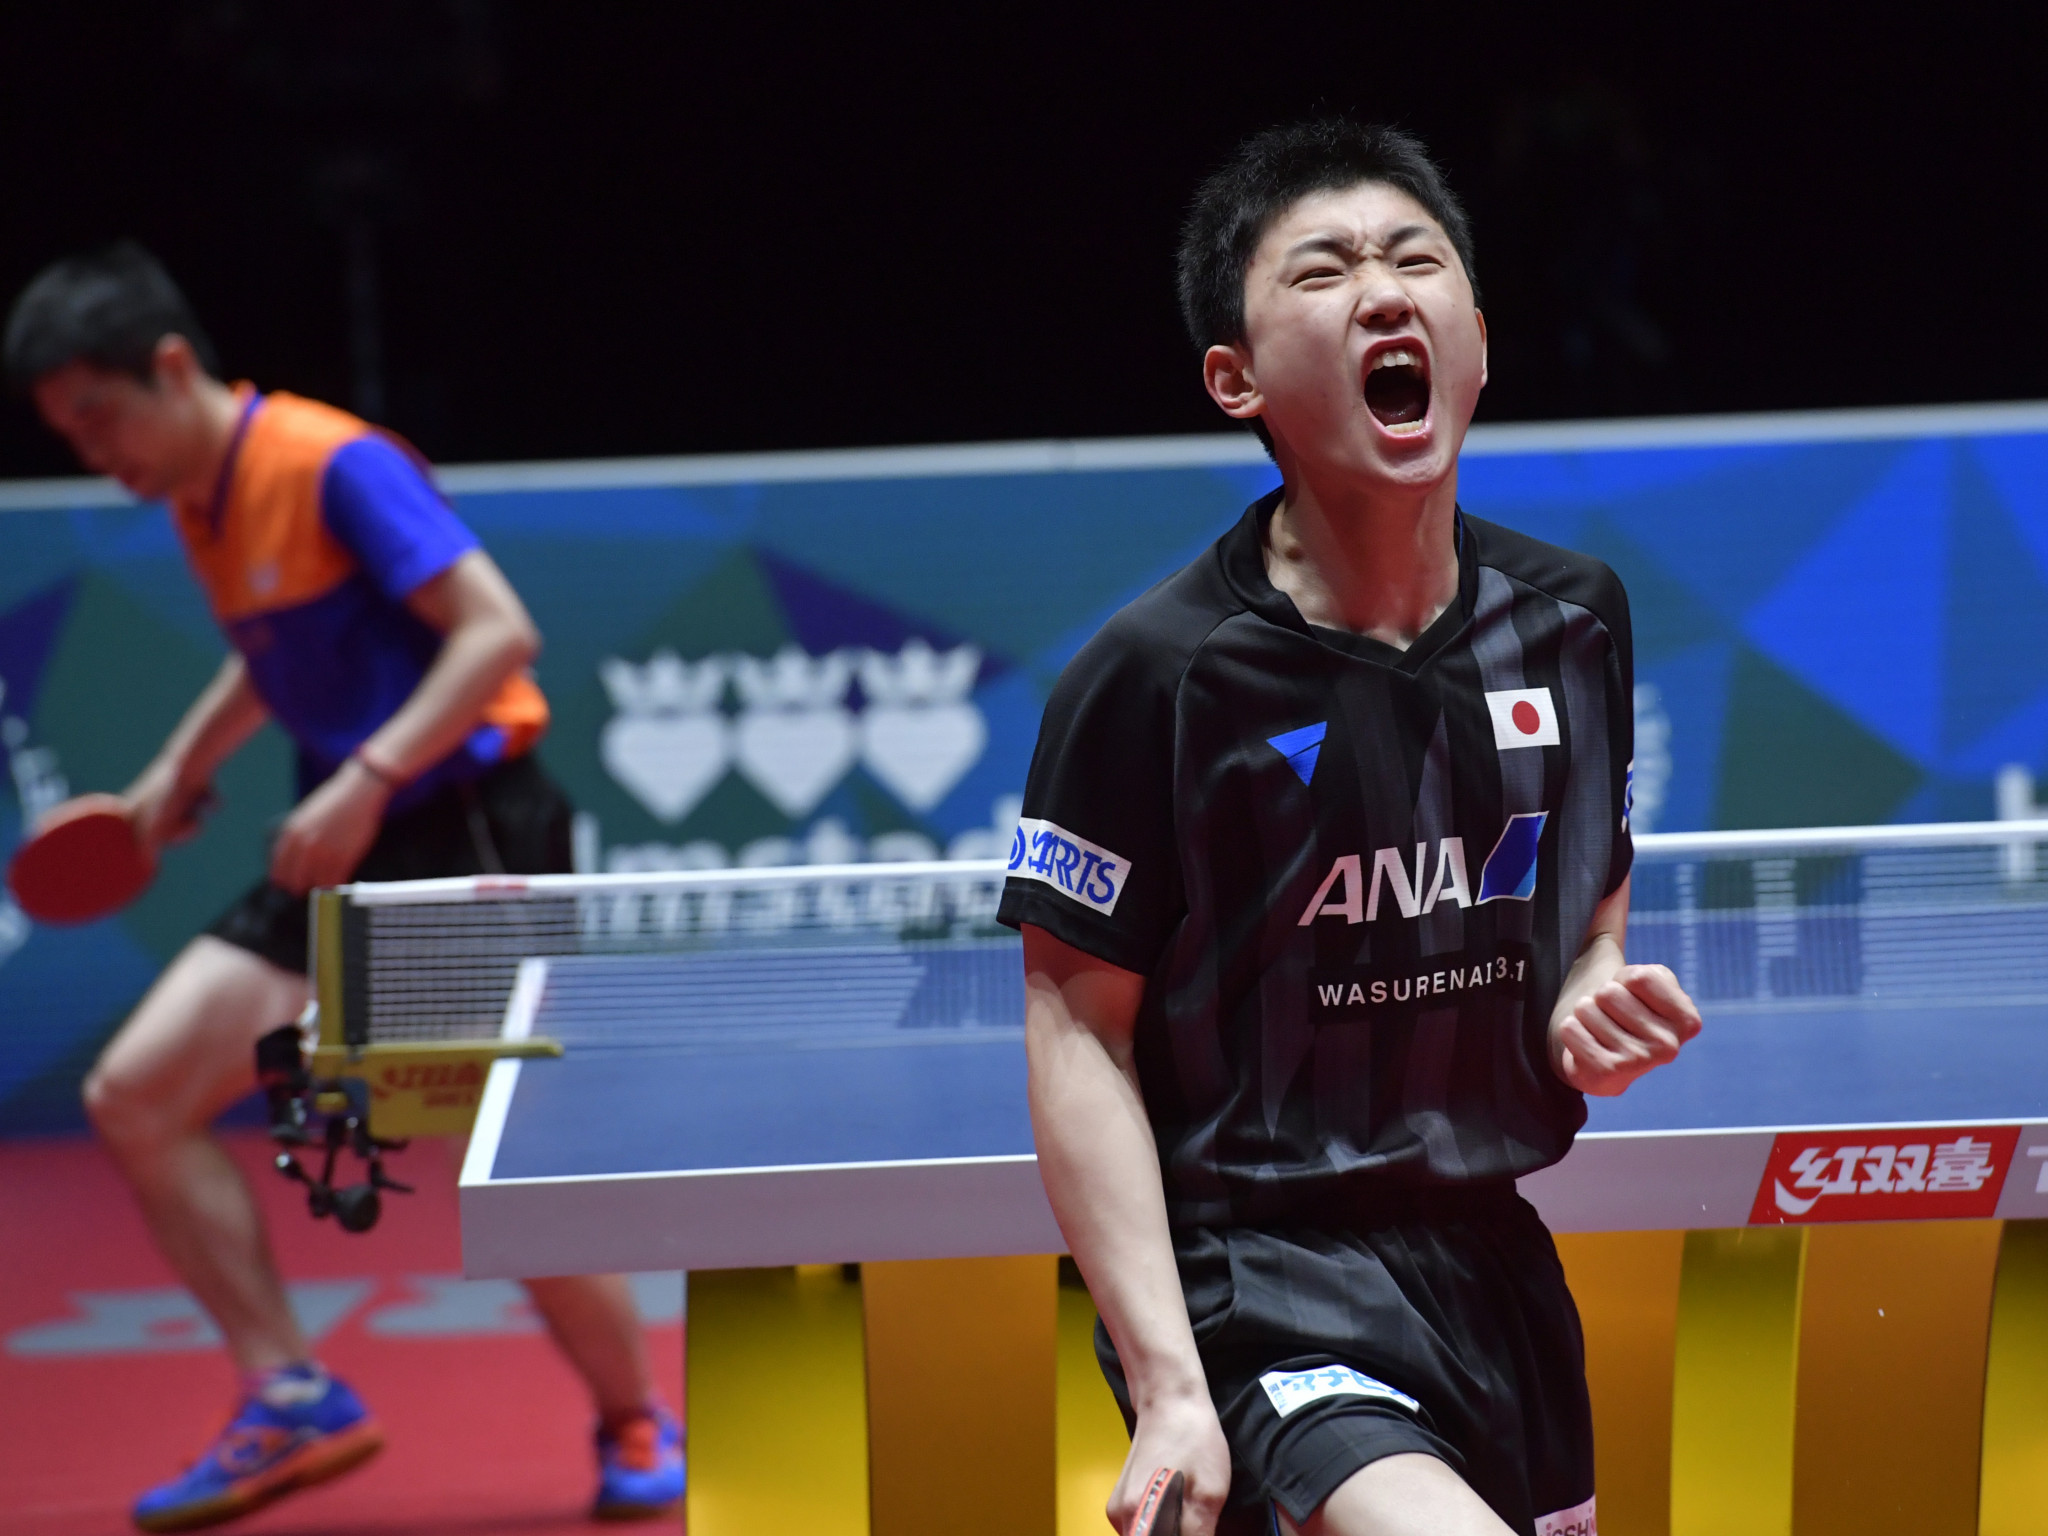 The ITTF announced new dates for the World Team Table Tennis Championships ©Getty Images